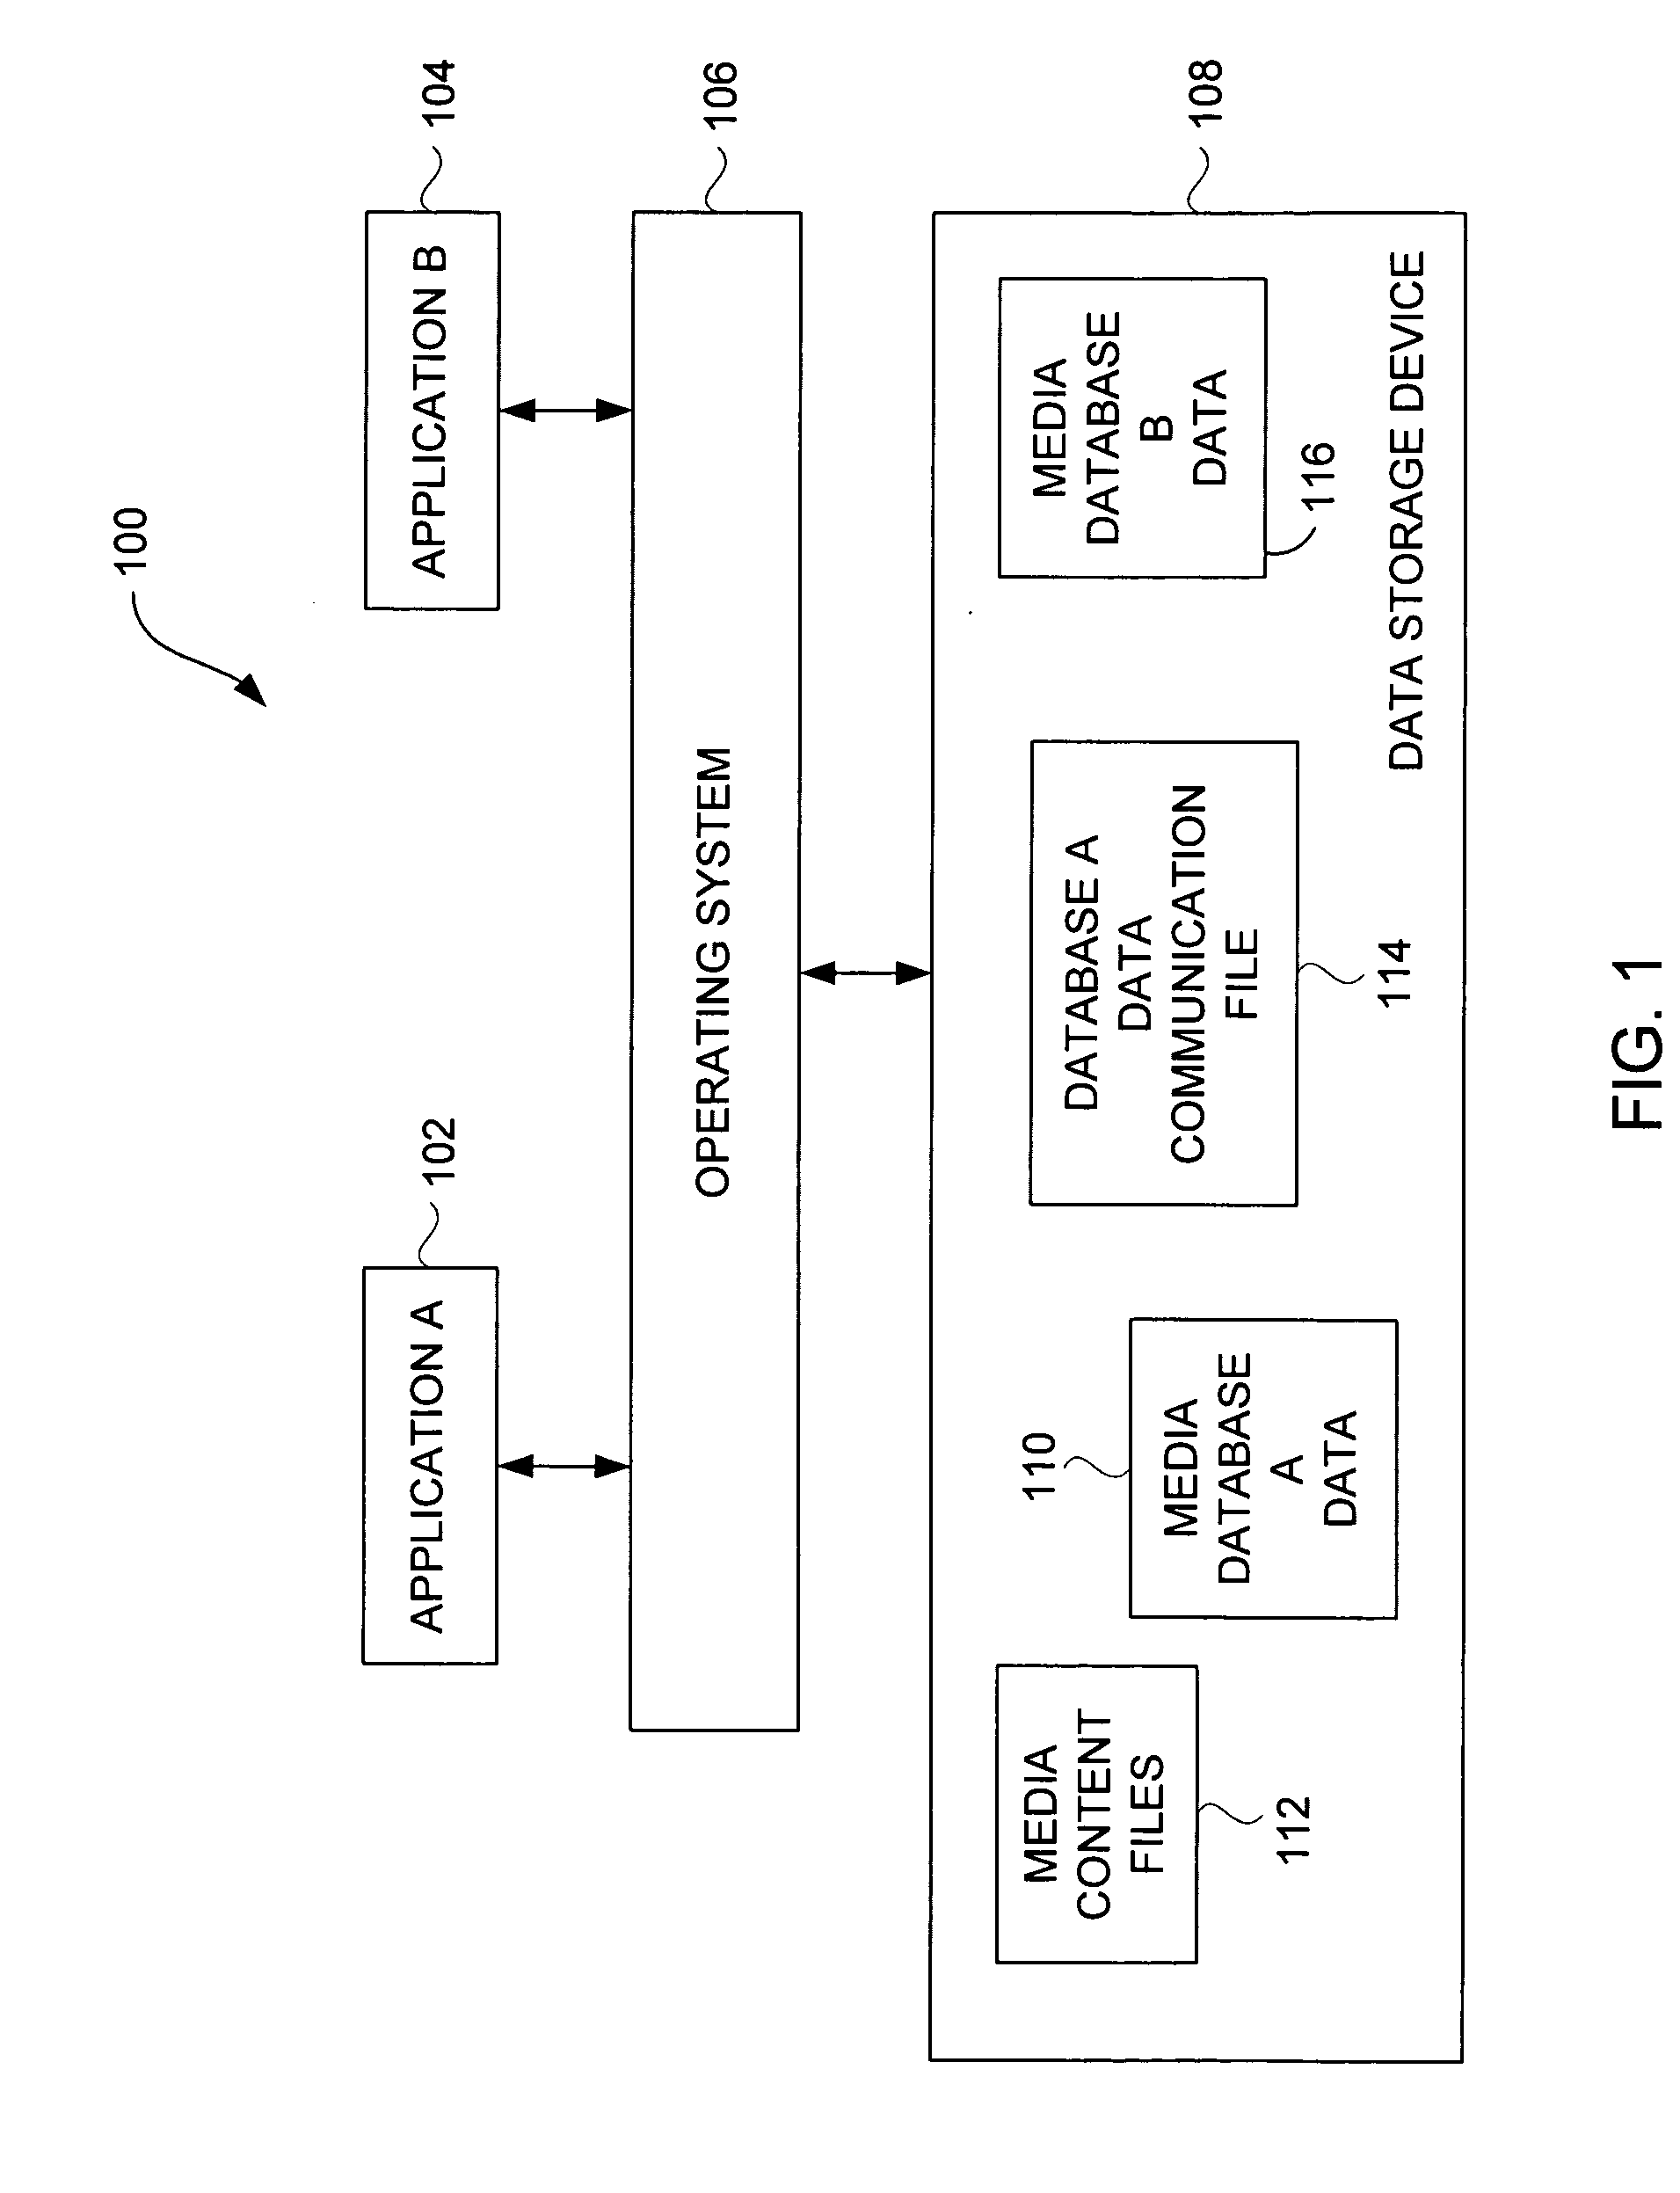 Method and system for data sharing between application programs